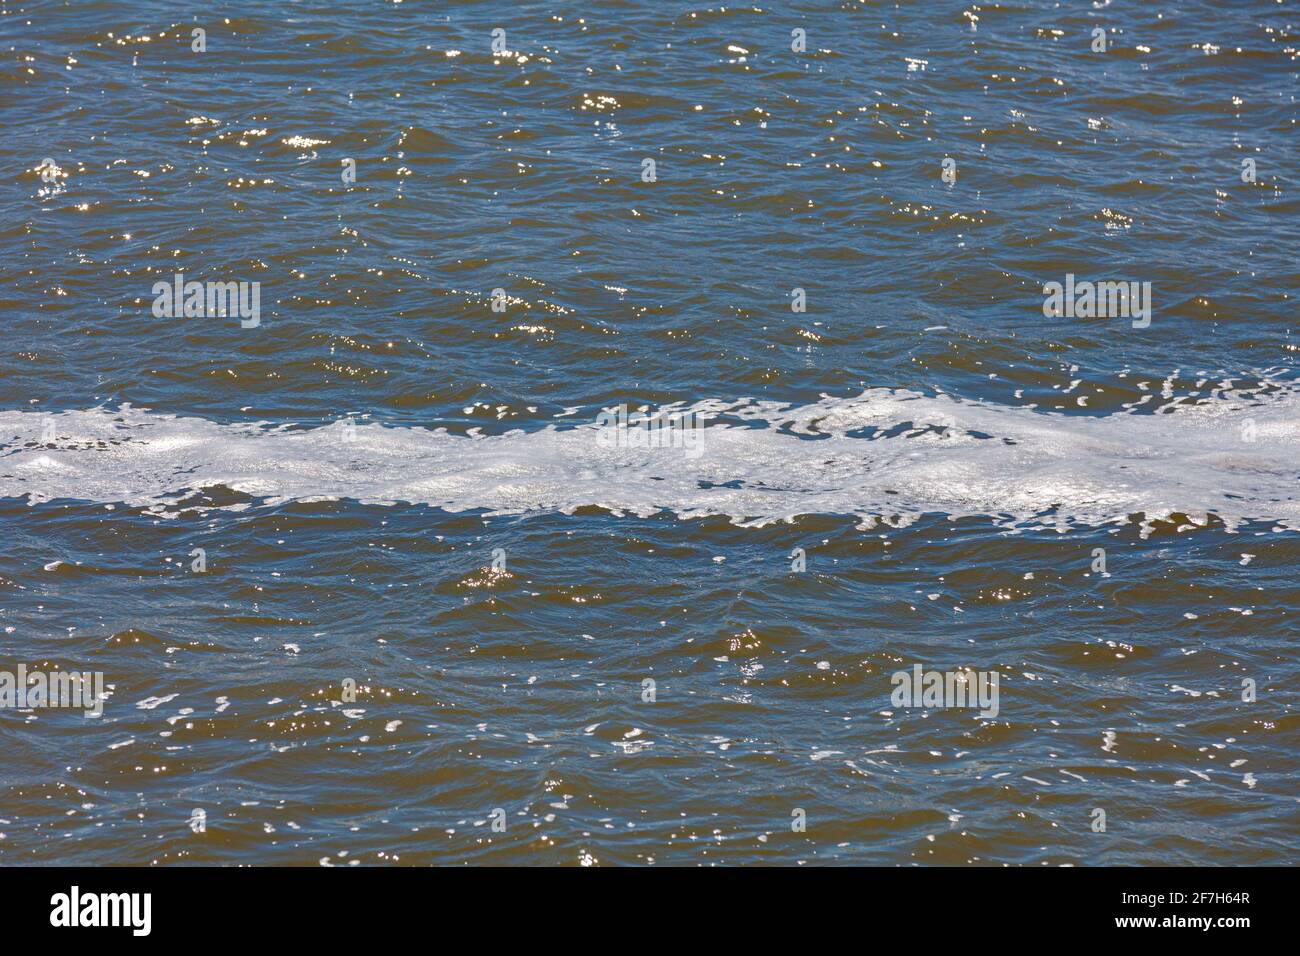 Abstract image of a foam stripe on a river during a wind storm in Steveston British Columbia Canada Stock Photo